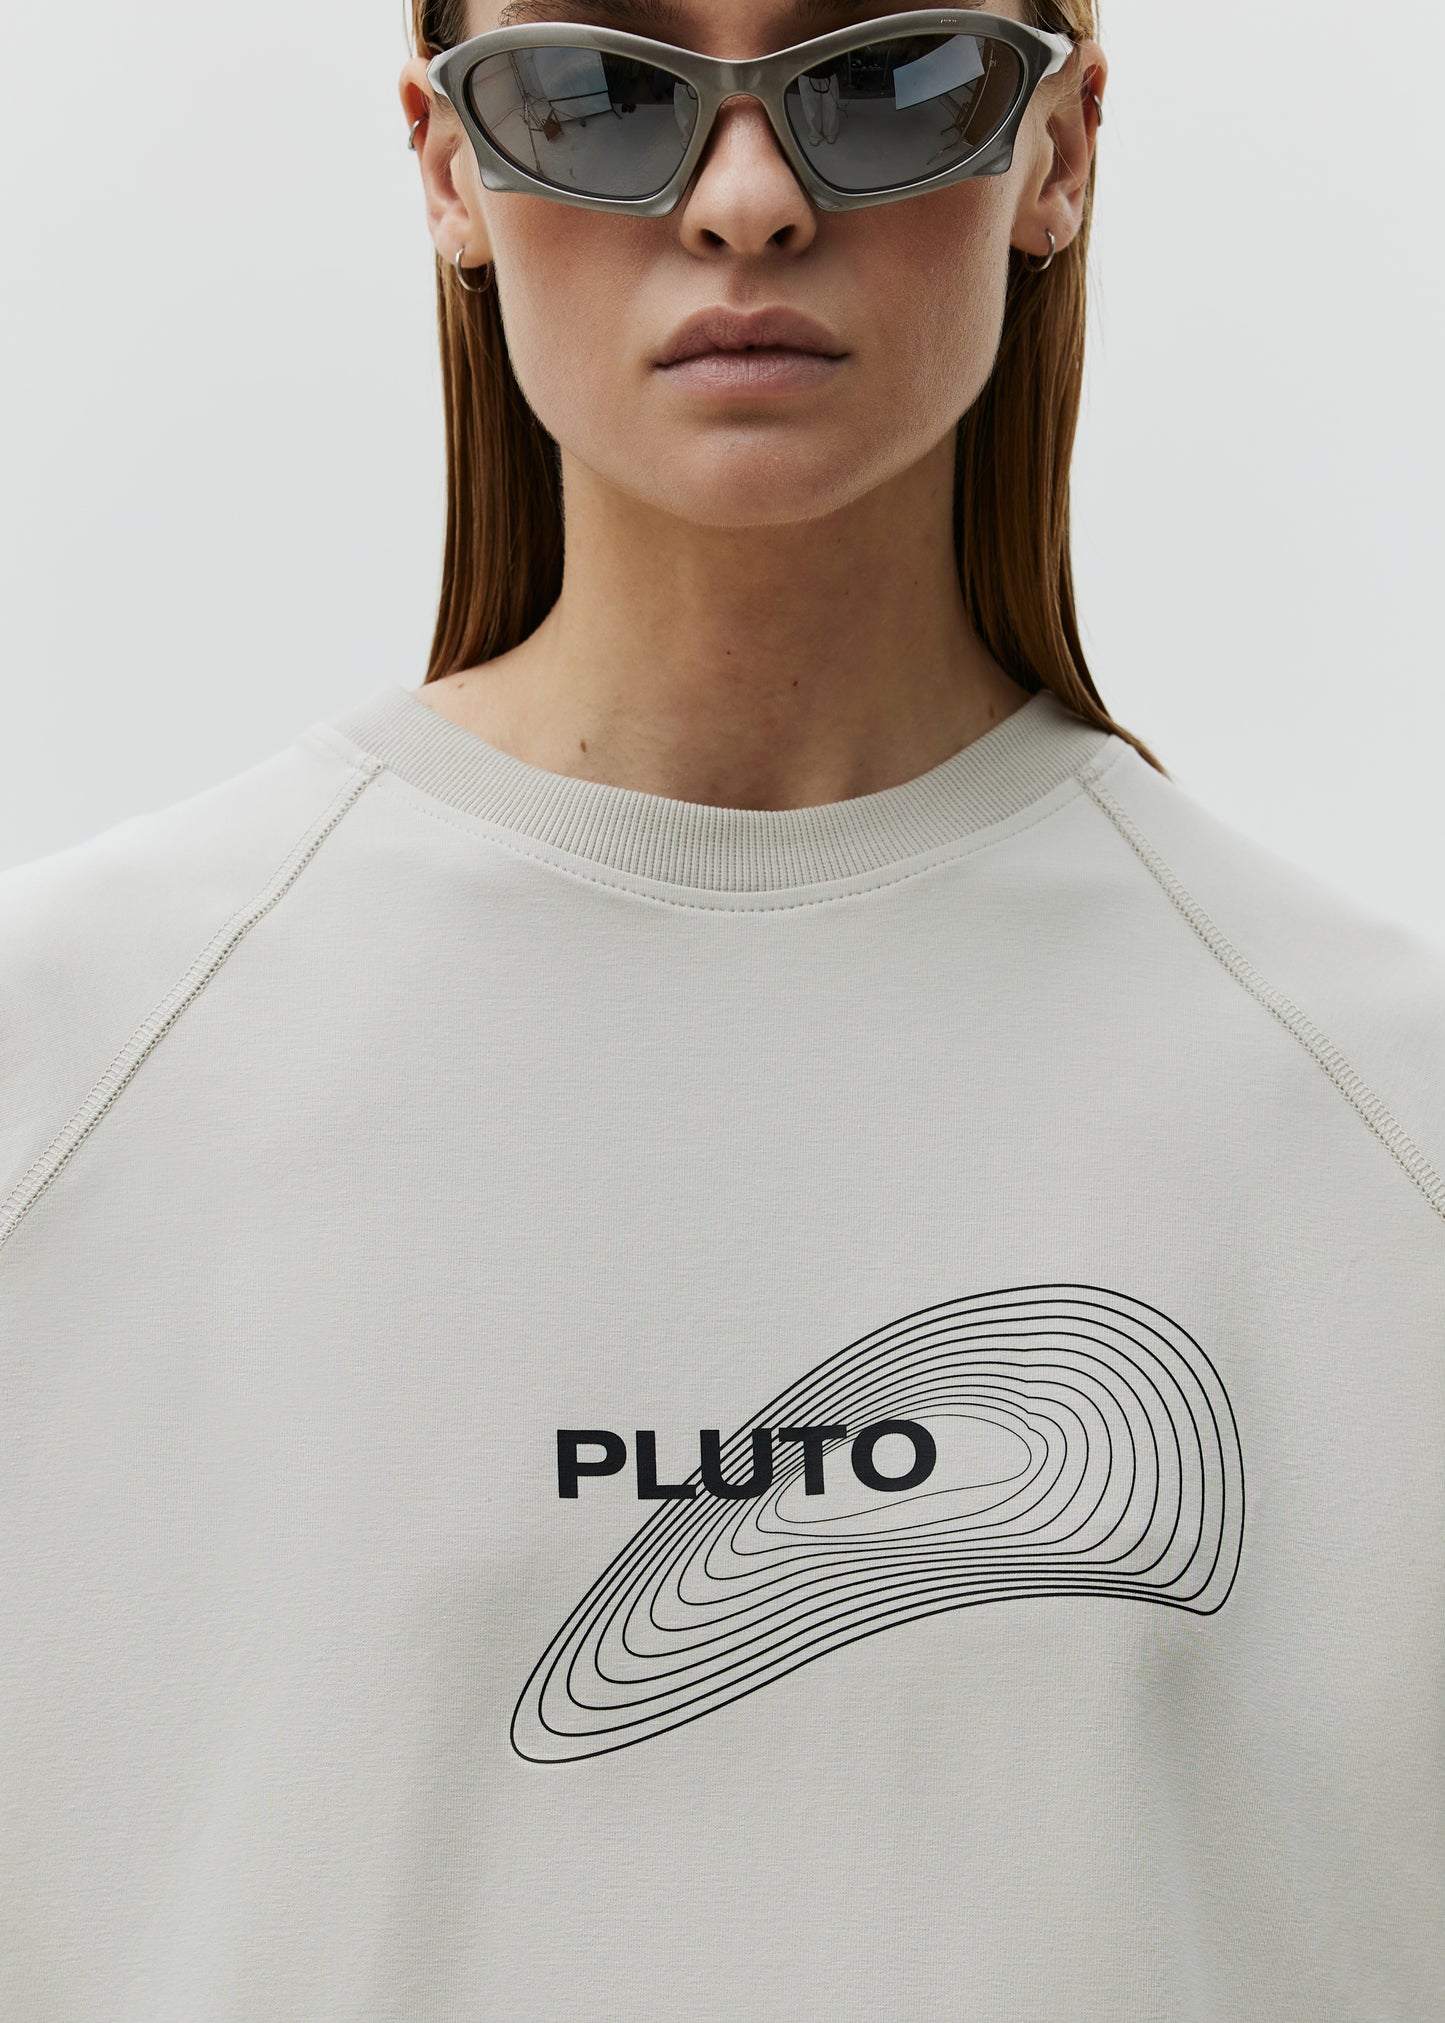 T-shirt Pluto Taupe